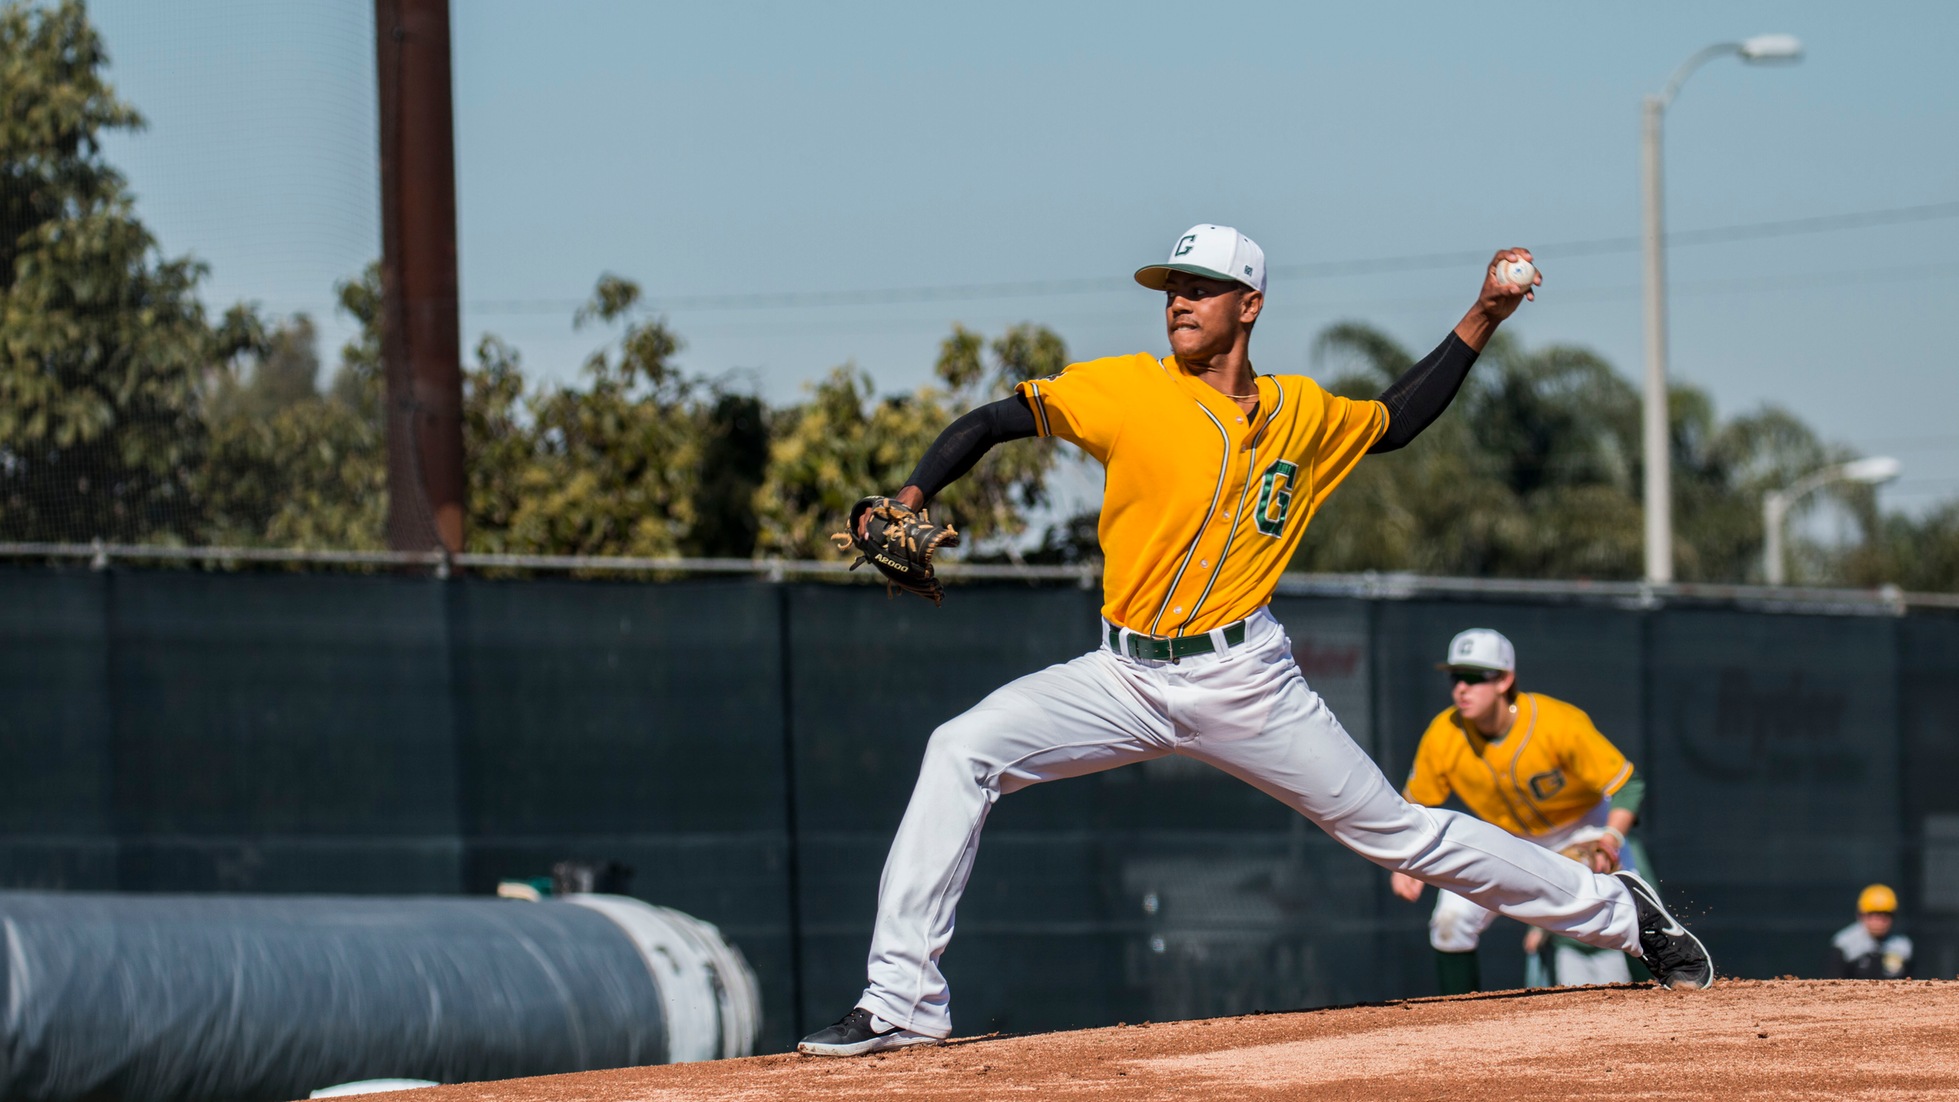 Baseball: Offense Struggles to Score in Doubleheader Sweep